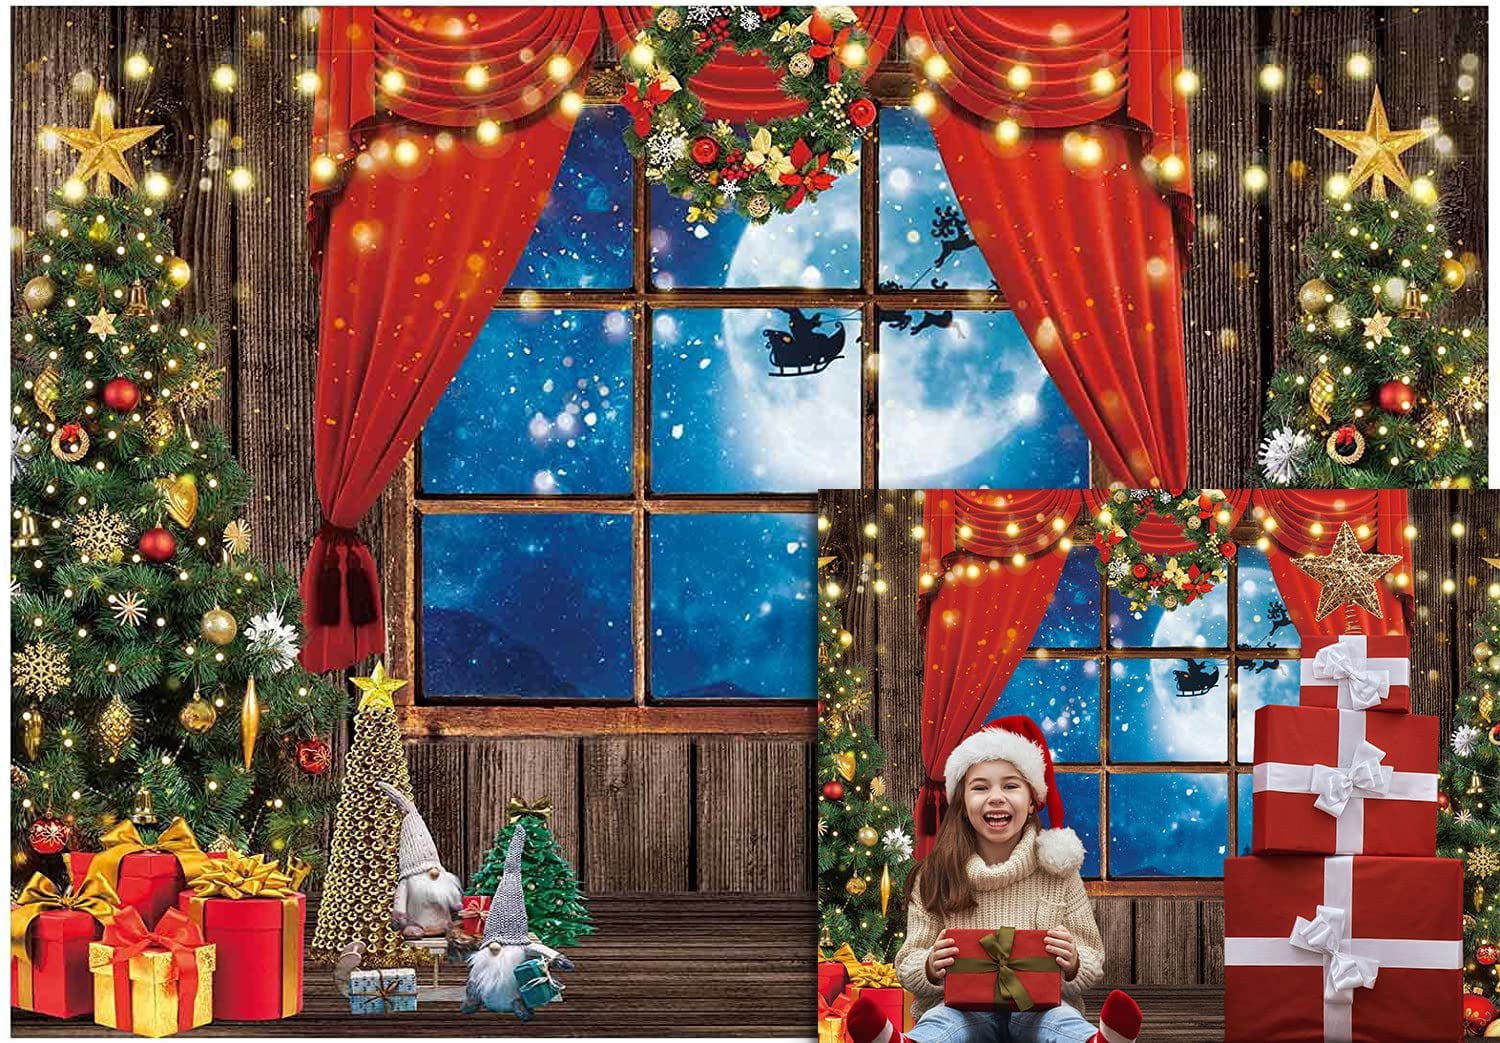 Moon Boat Christmas Photo Door Banner Backdrop Props Xmas/Winter/Holiday Party Hanging Decorations/Supplies/Favors